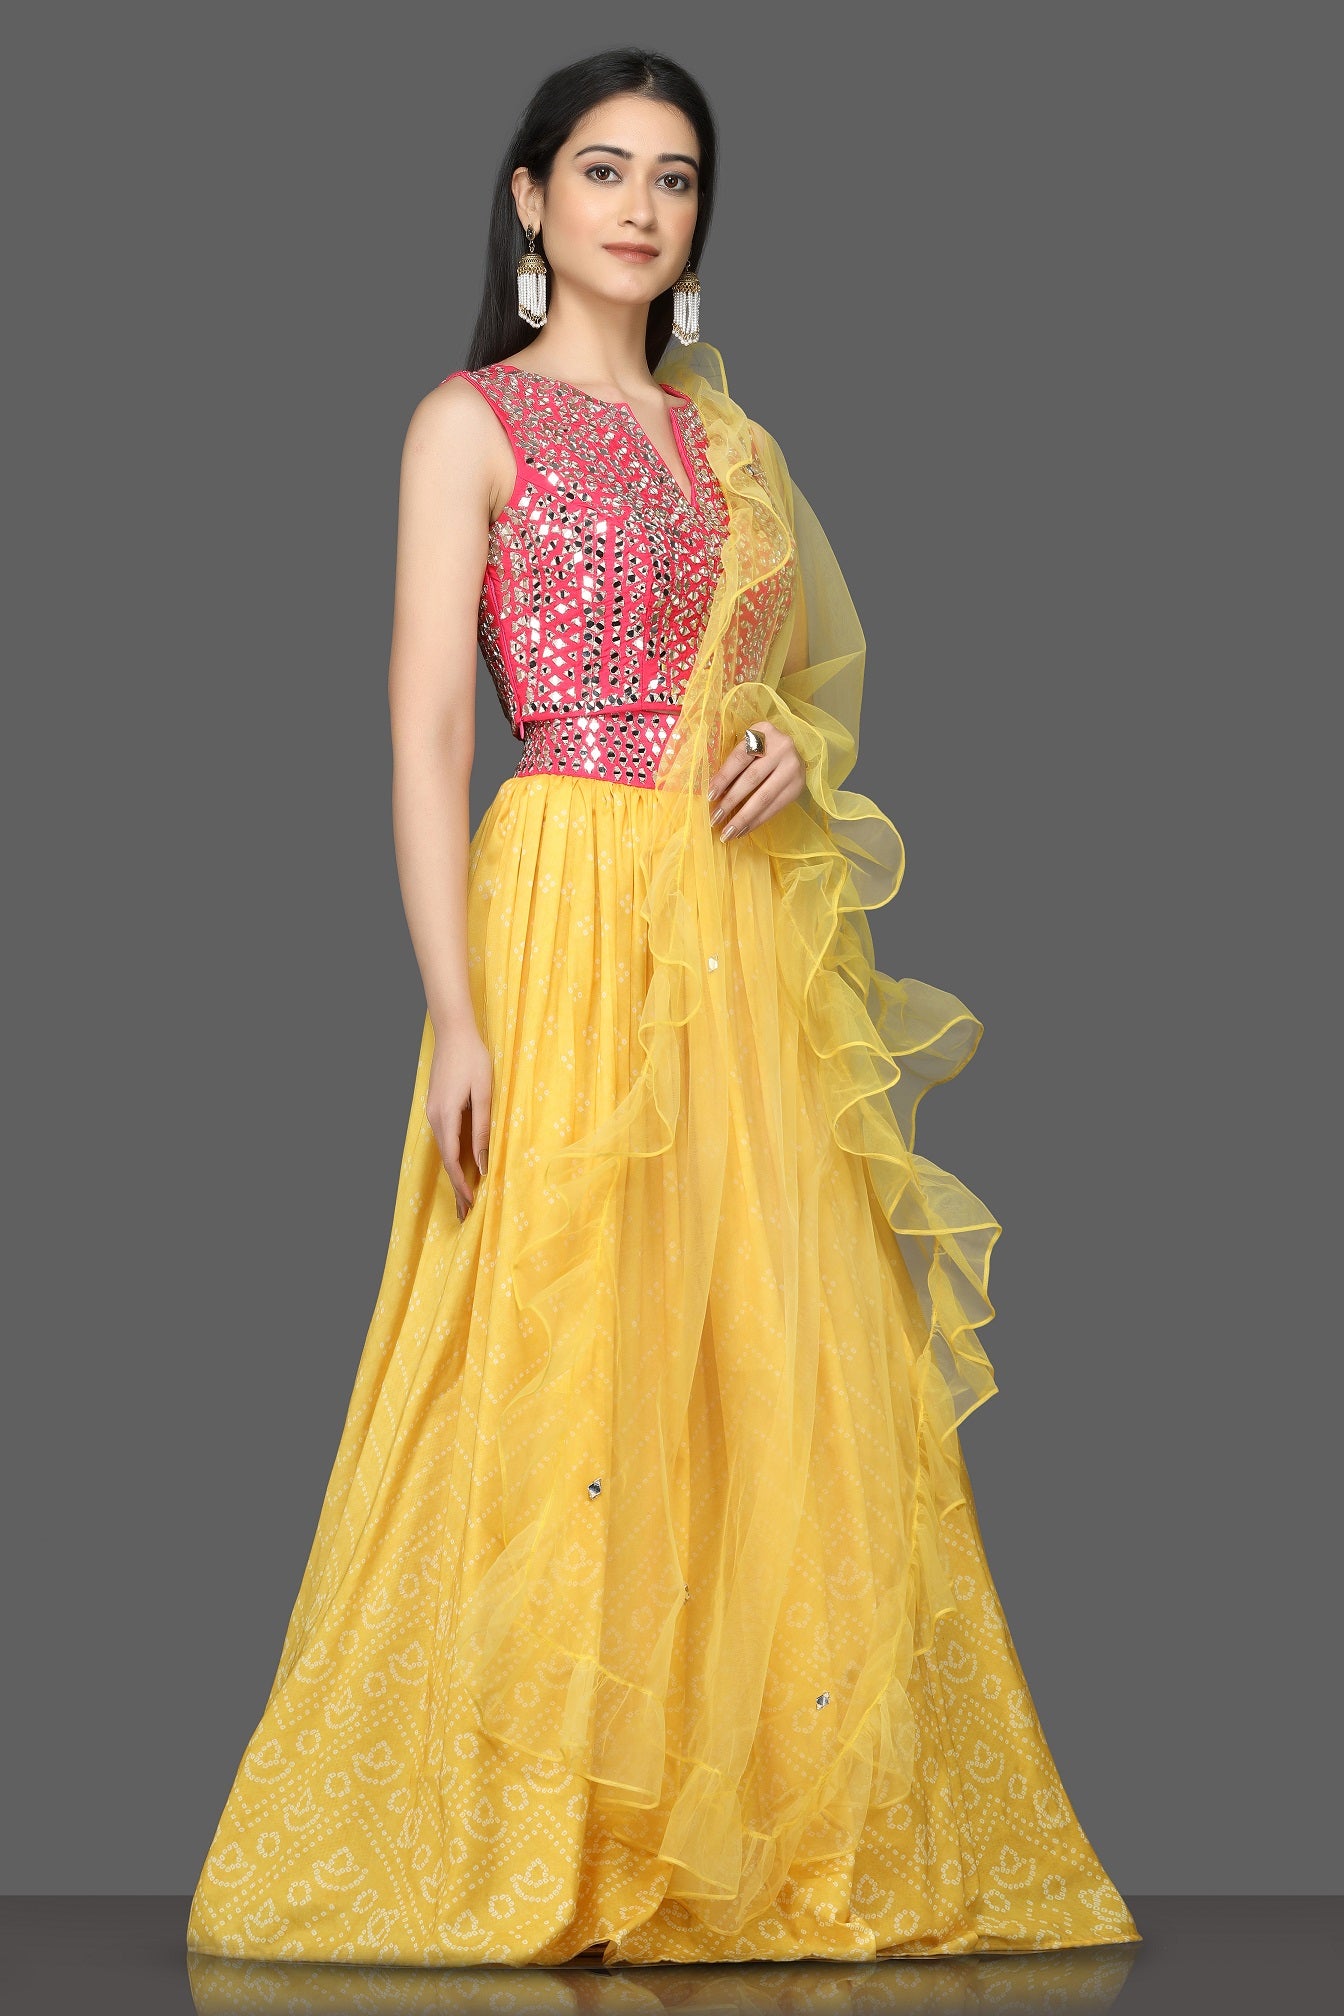 Buy gorgeous pink and yellow mirror work lehenga online in USA with ruffle dupatta. Flaunt your sartorial choices on special occasions with beautiful designer gowns, Anarkali suits, traditional salwar suits, Indian lehengas from Pure Elegance Indian fashion boutique in USA. -right